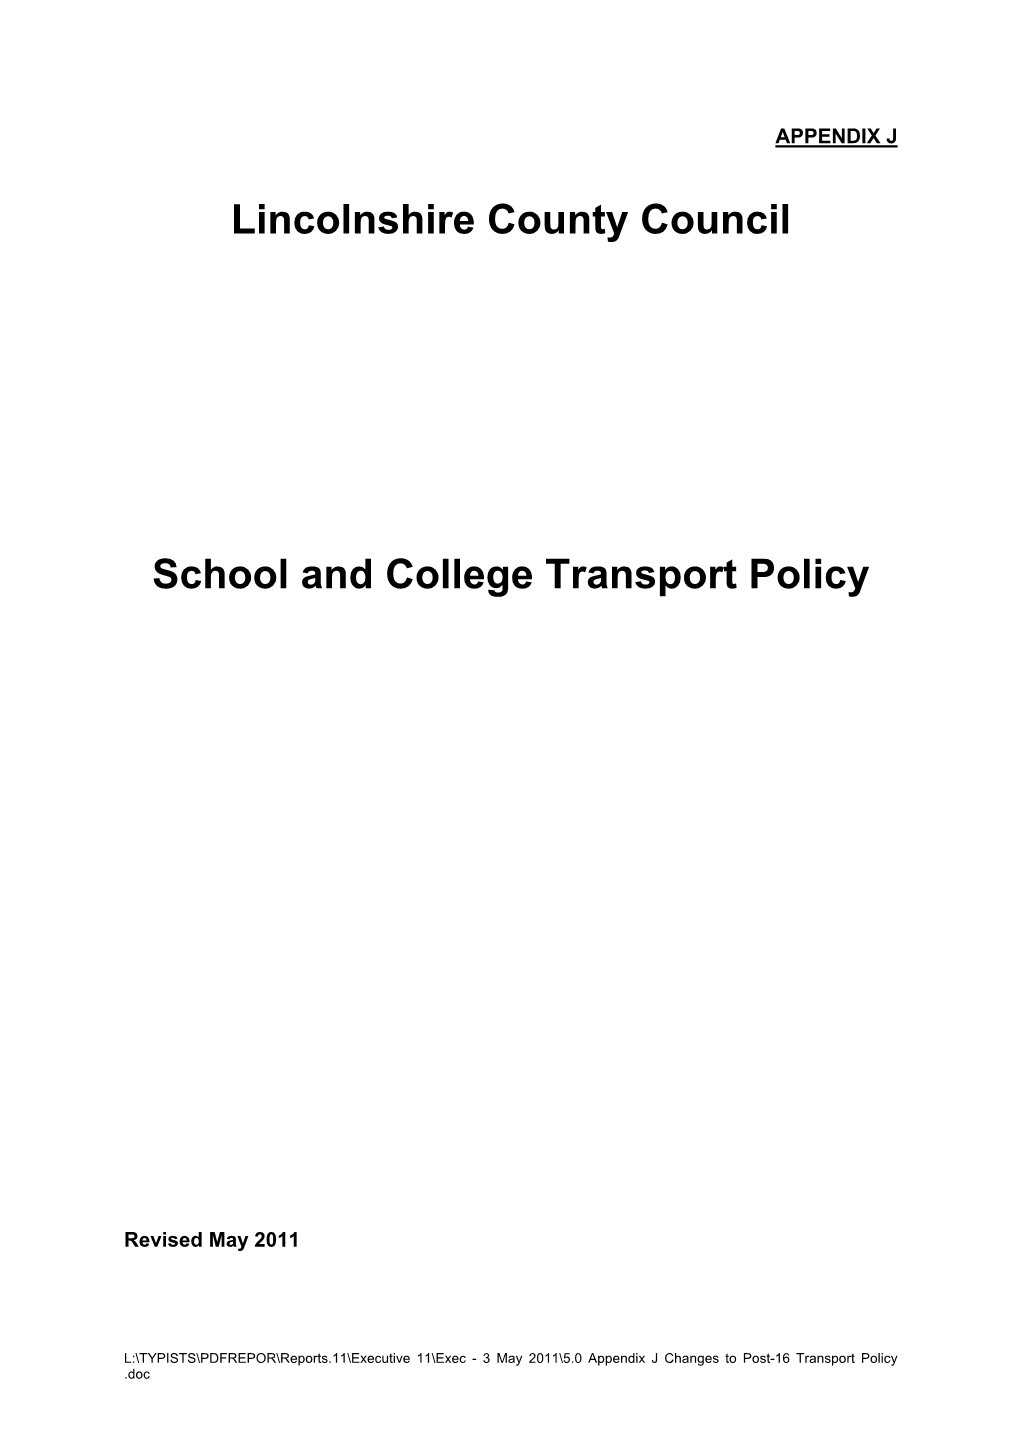 Lincolnshire County Council School and College Transport Policy